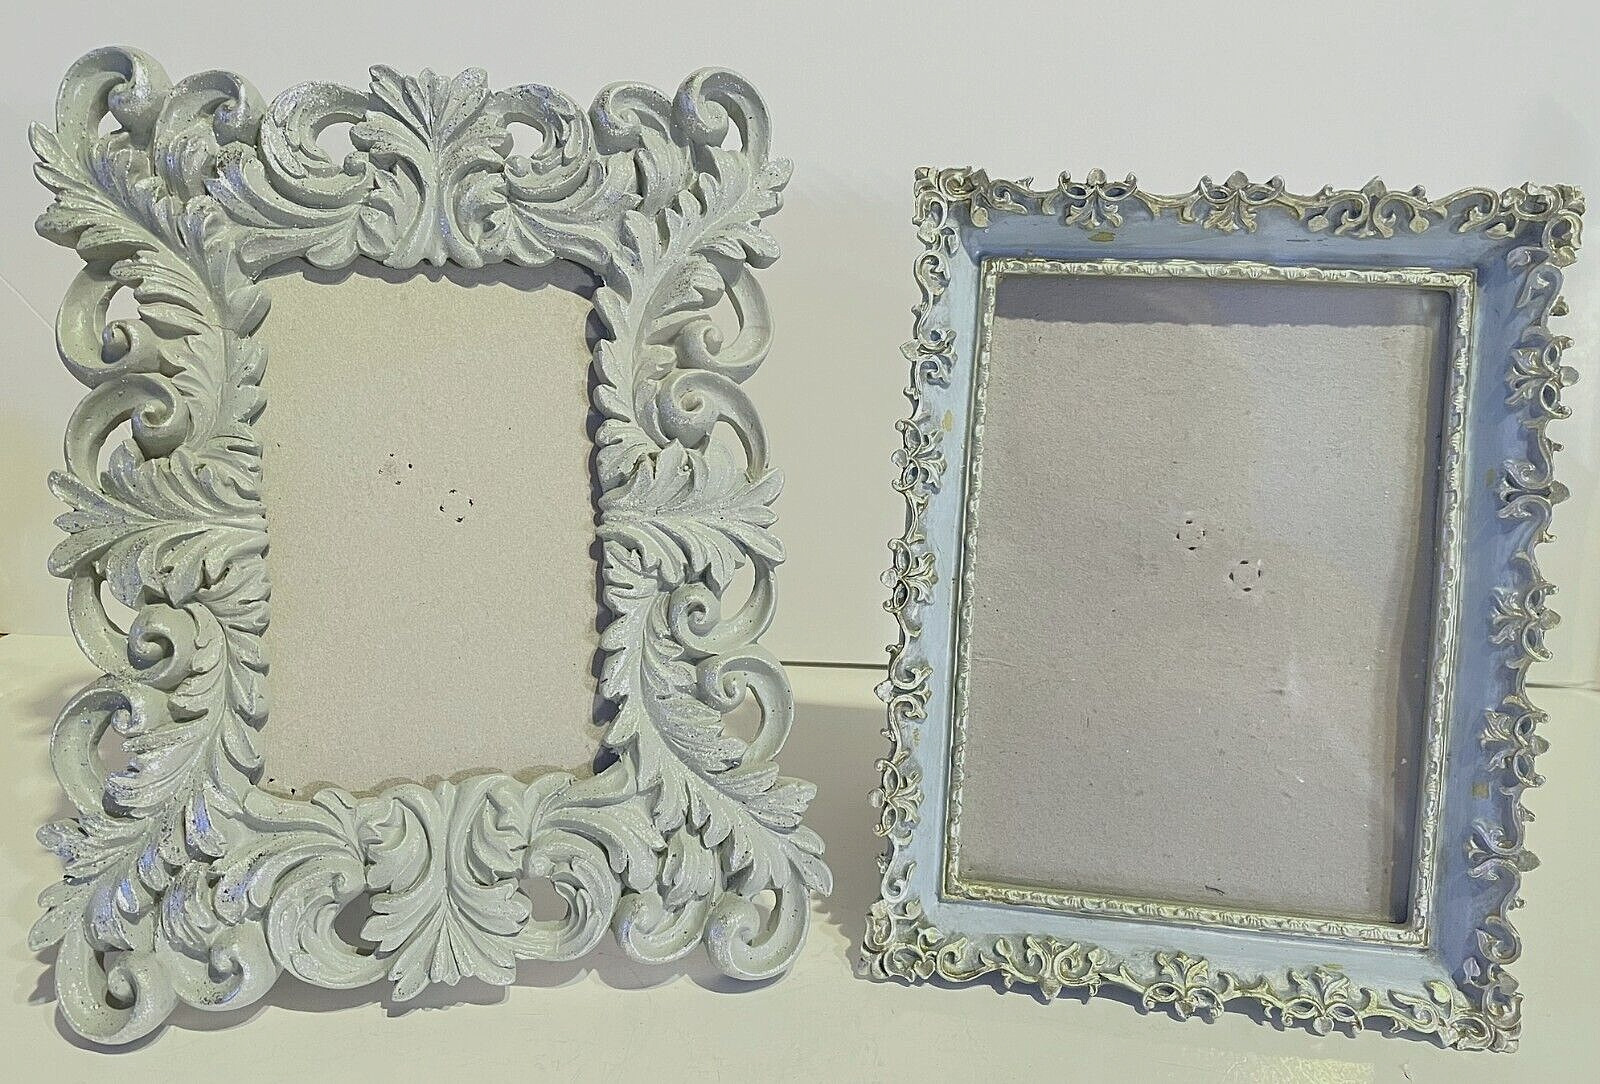 Set of 2 Vintage Style Blue & Gray Silver Resin Frames for 6x4 & 5x7 Photos